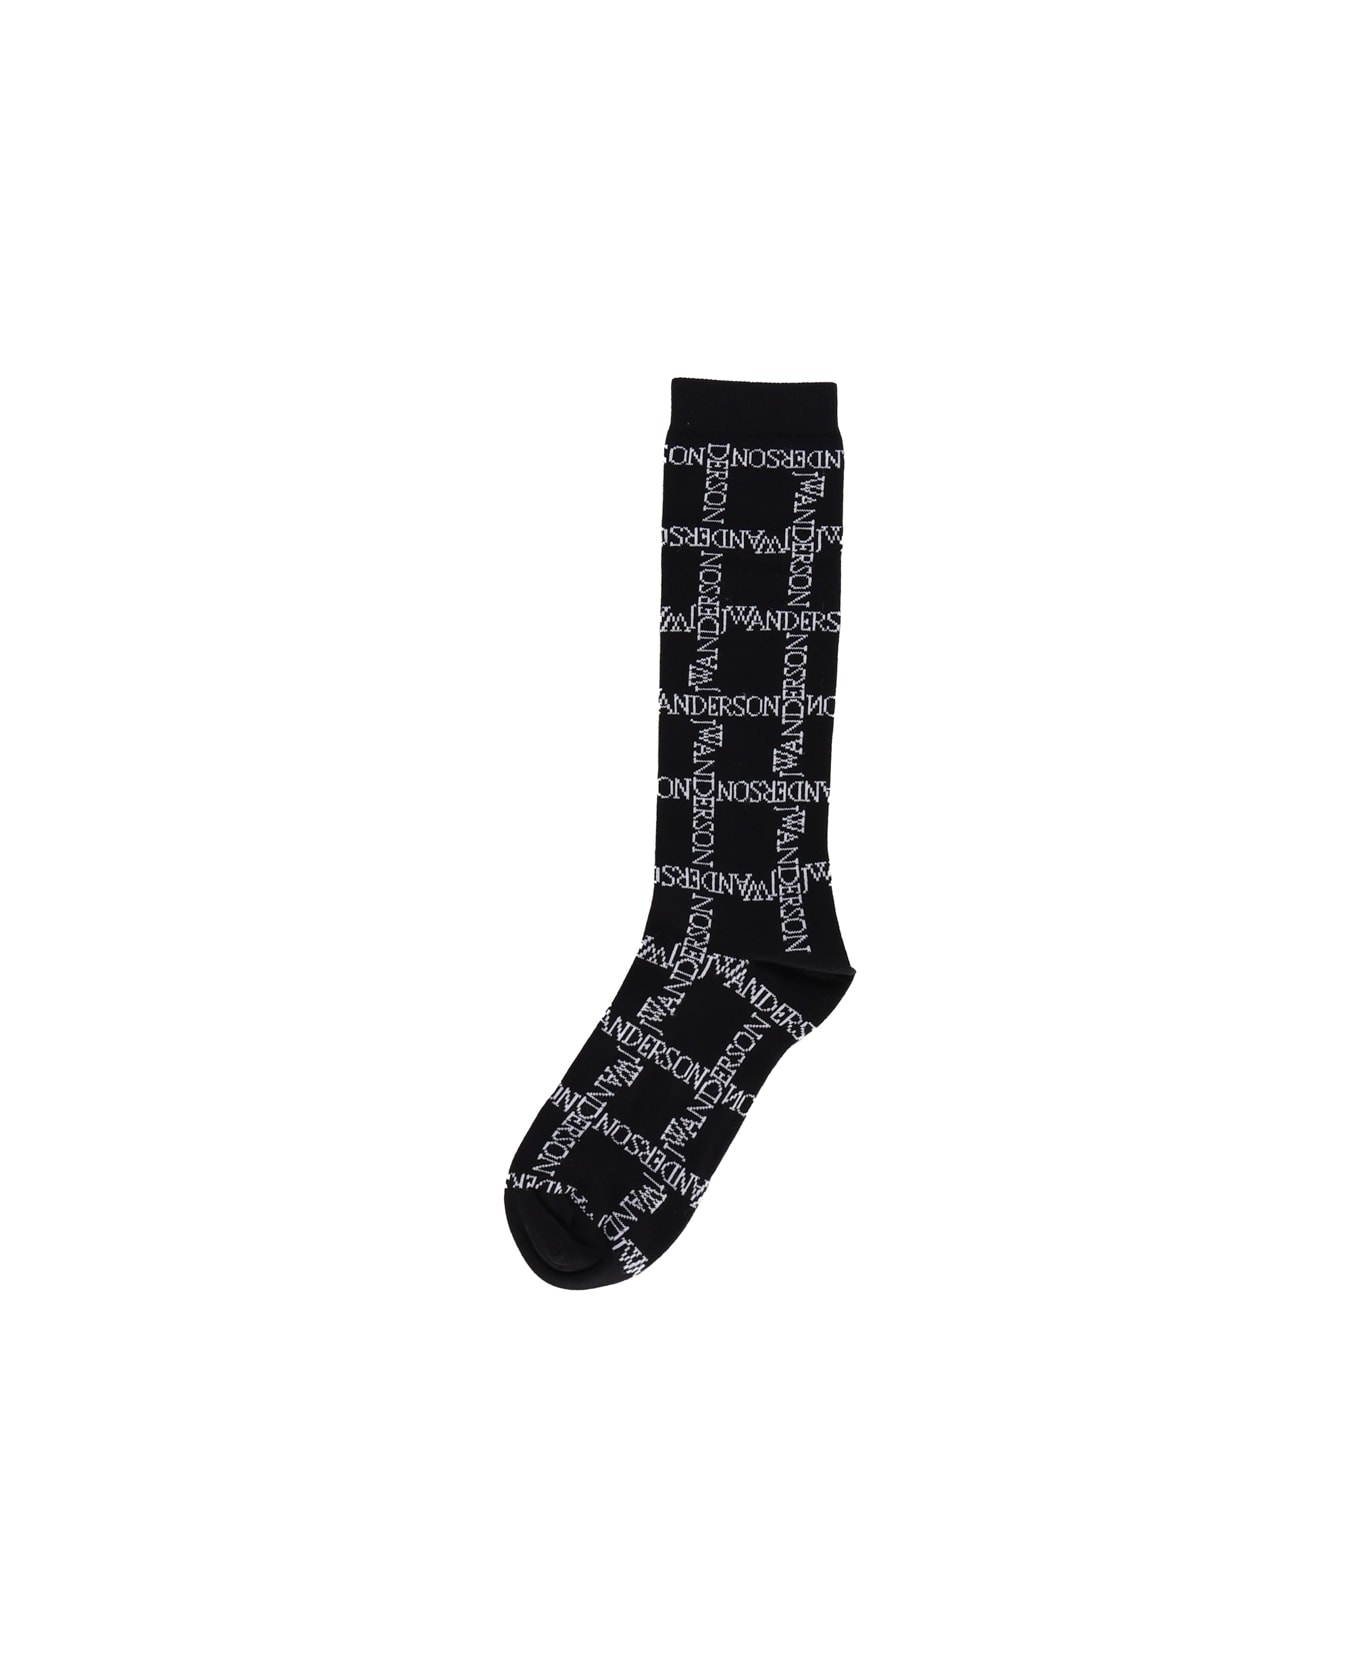 J.W. Anderson Men's Socks With All-over Logo Decoration - Black/white 靴下